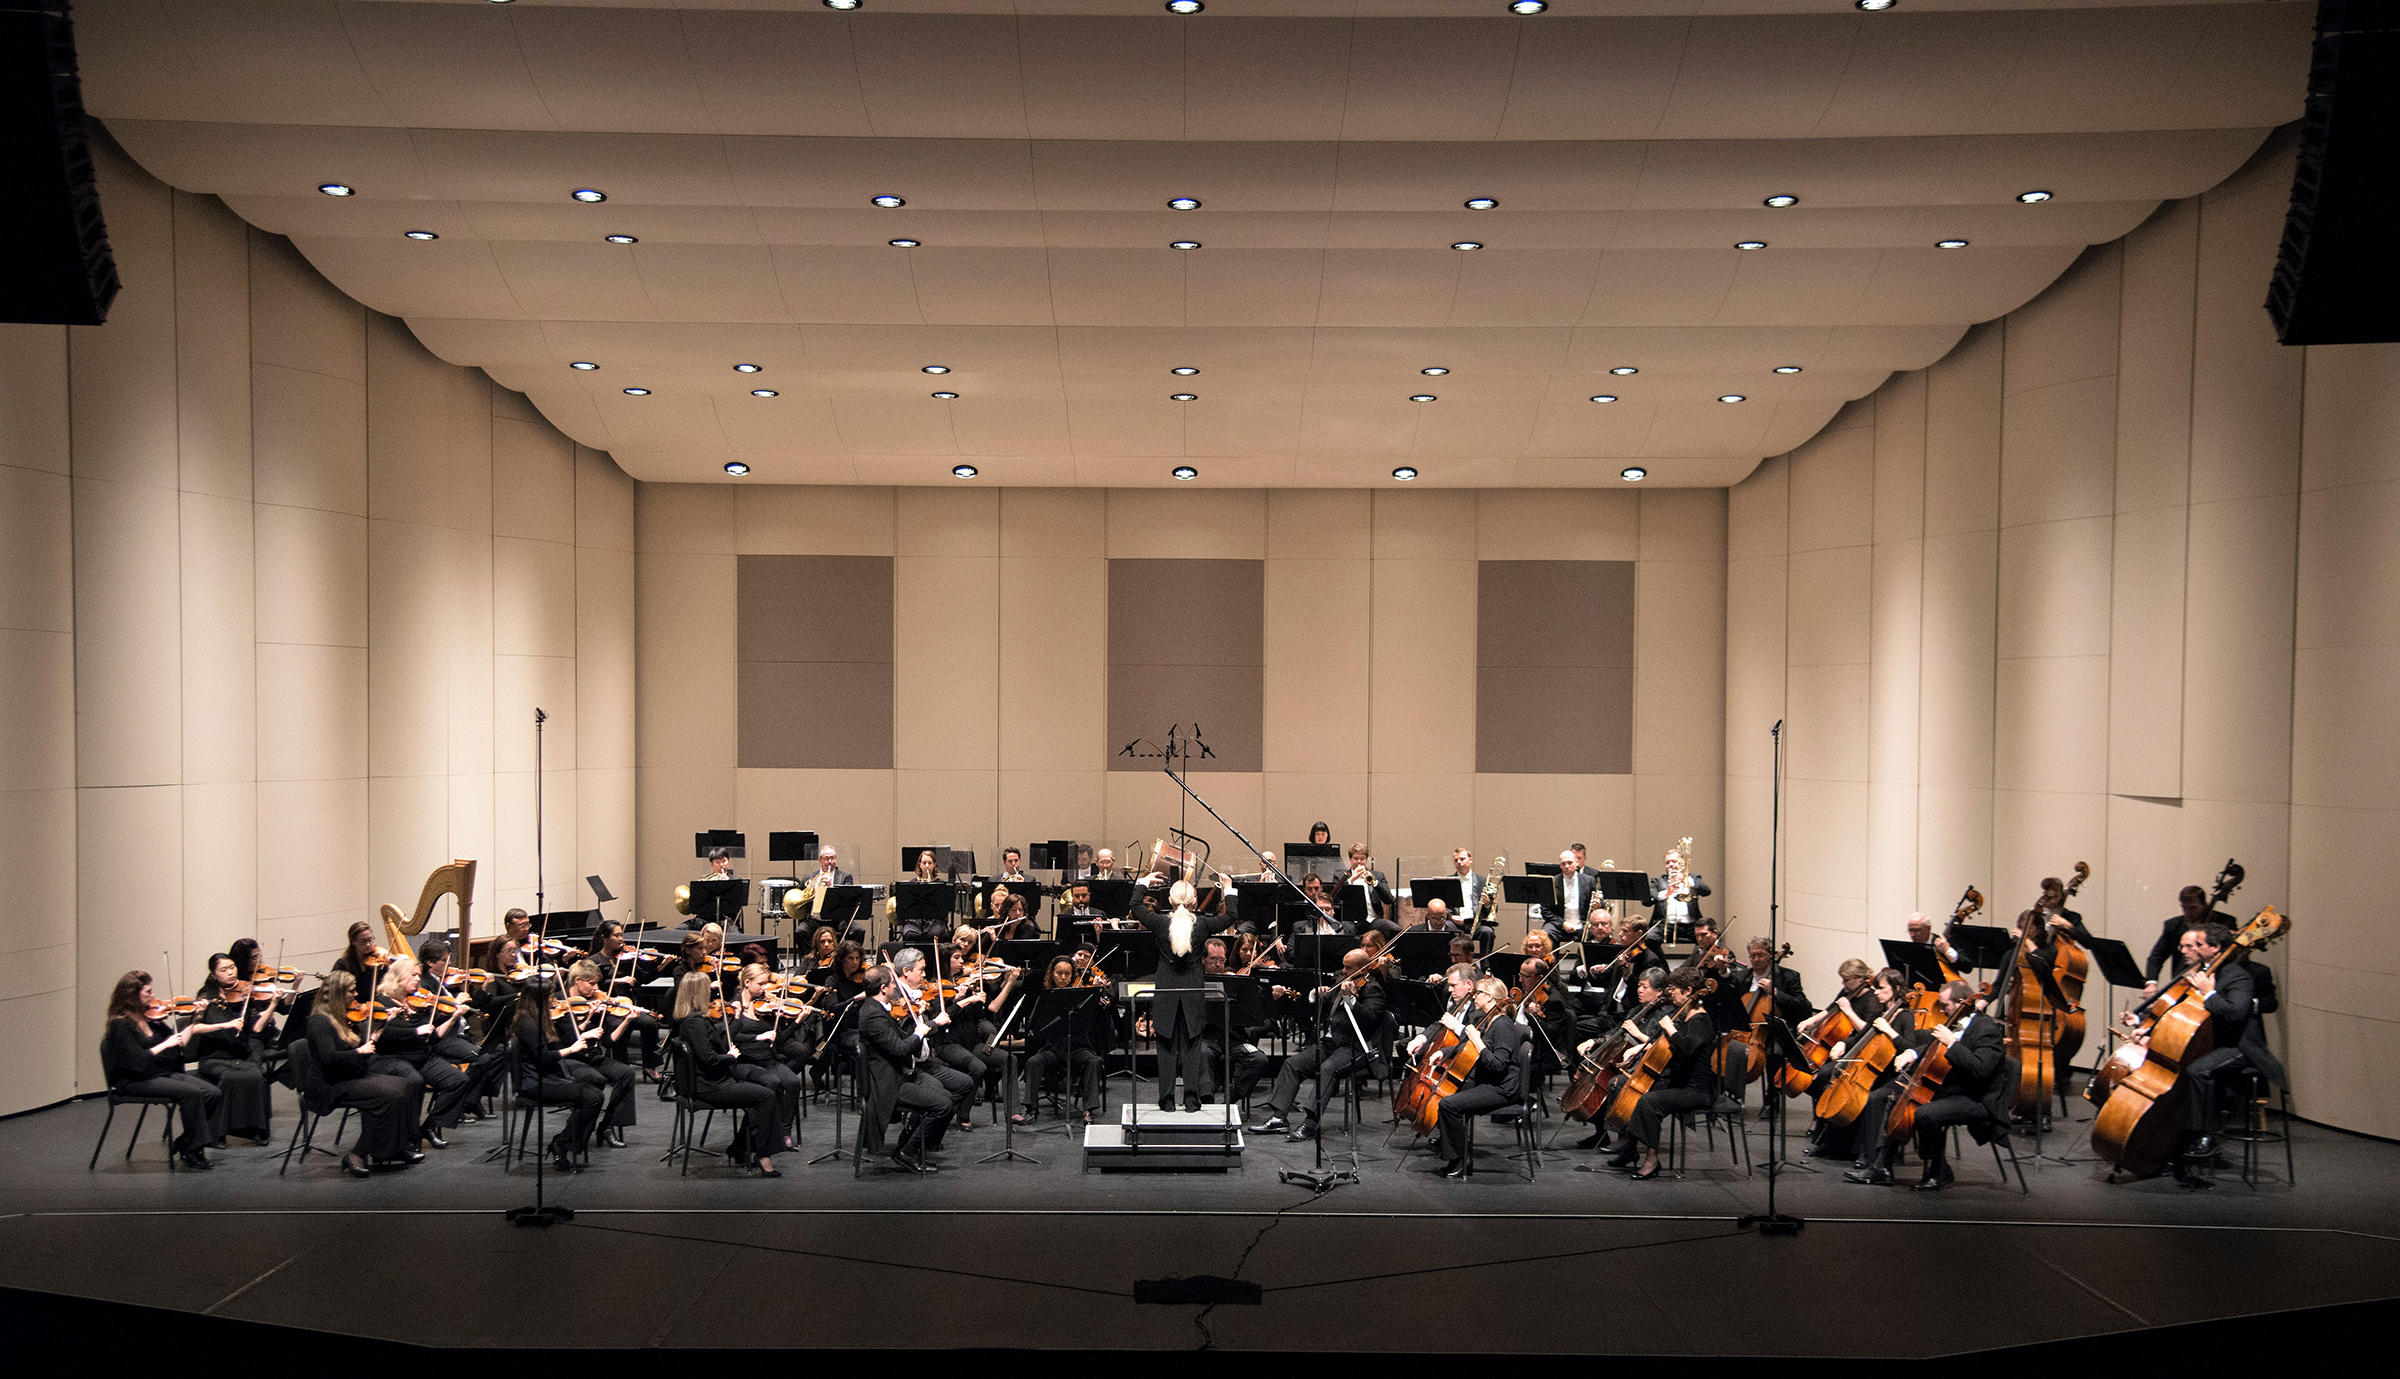 Sarasota Orchestra Says It Will Pursue Options Outside Of City For New